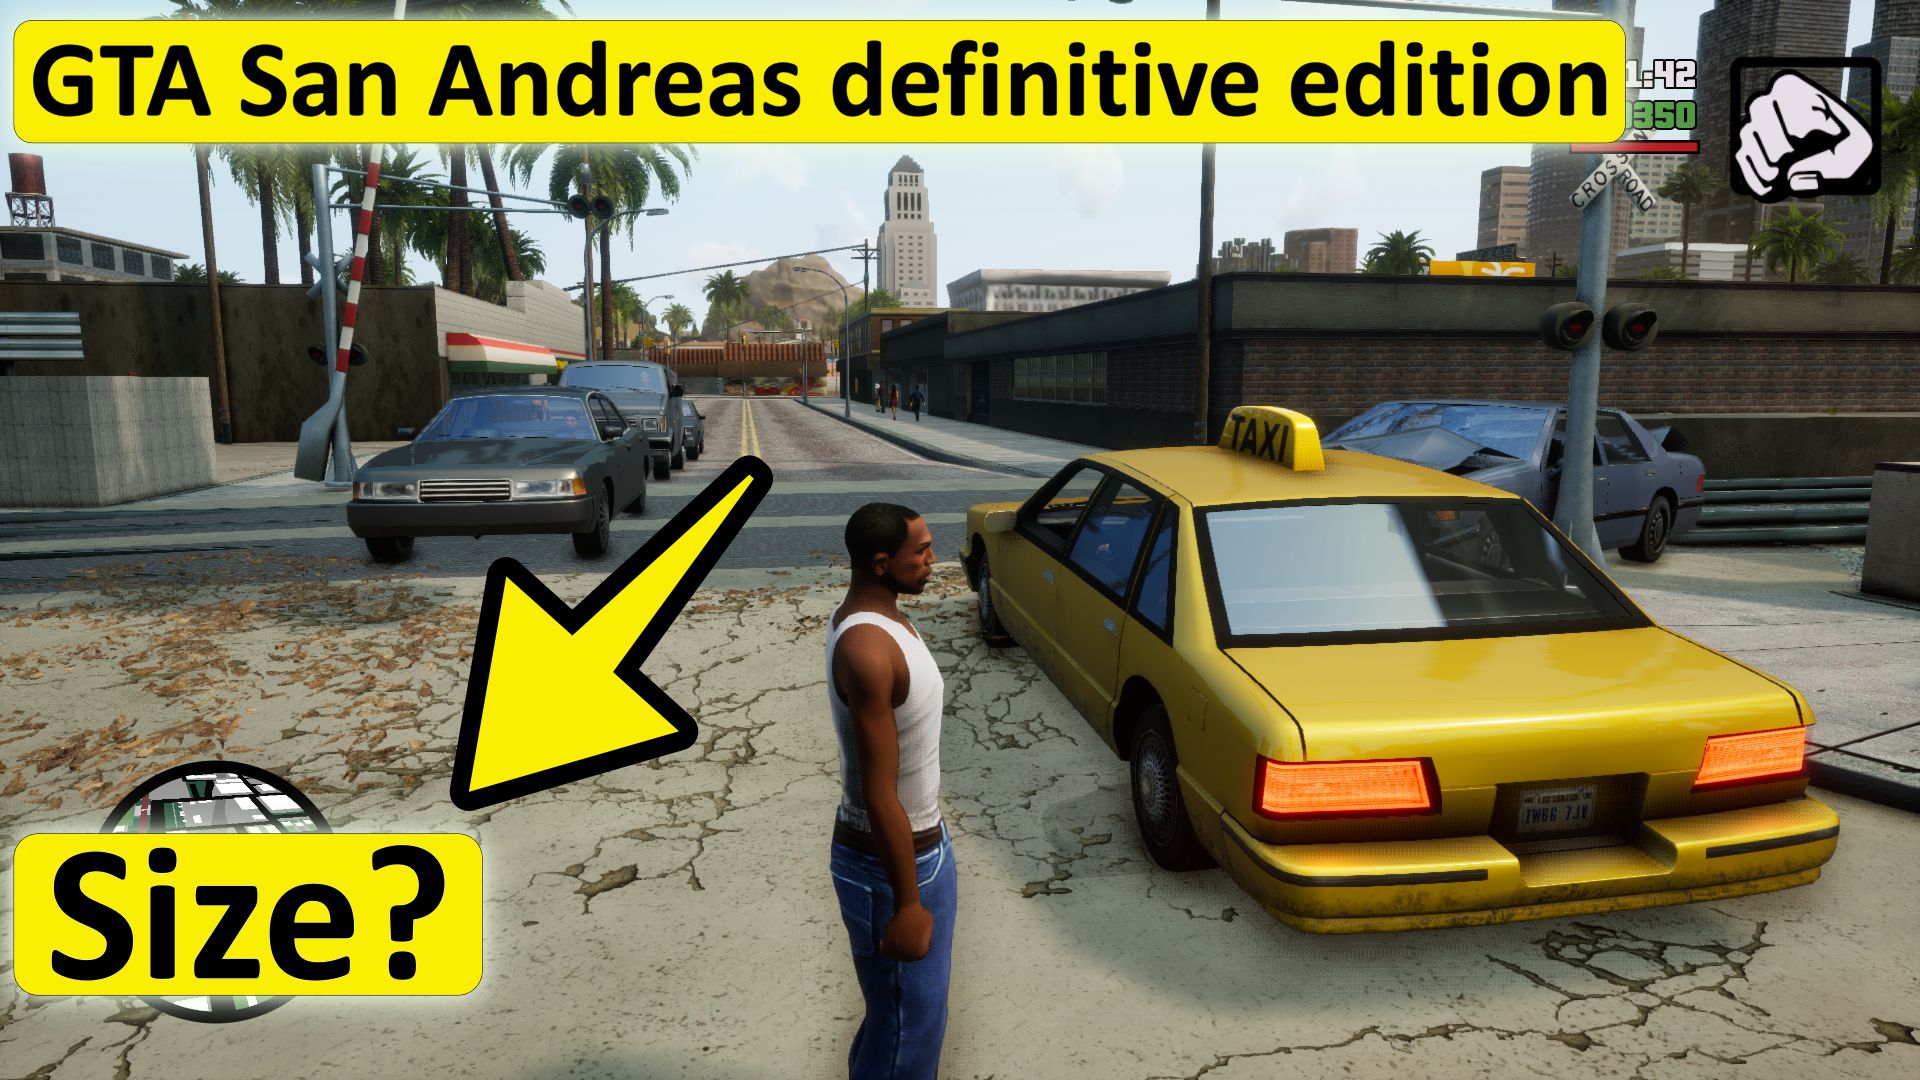 GTA San Andreas definitive edition size for PC, Xbox, Playstation